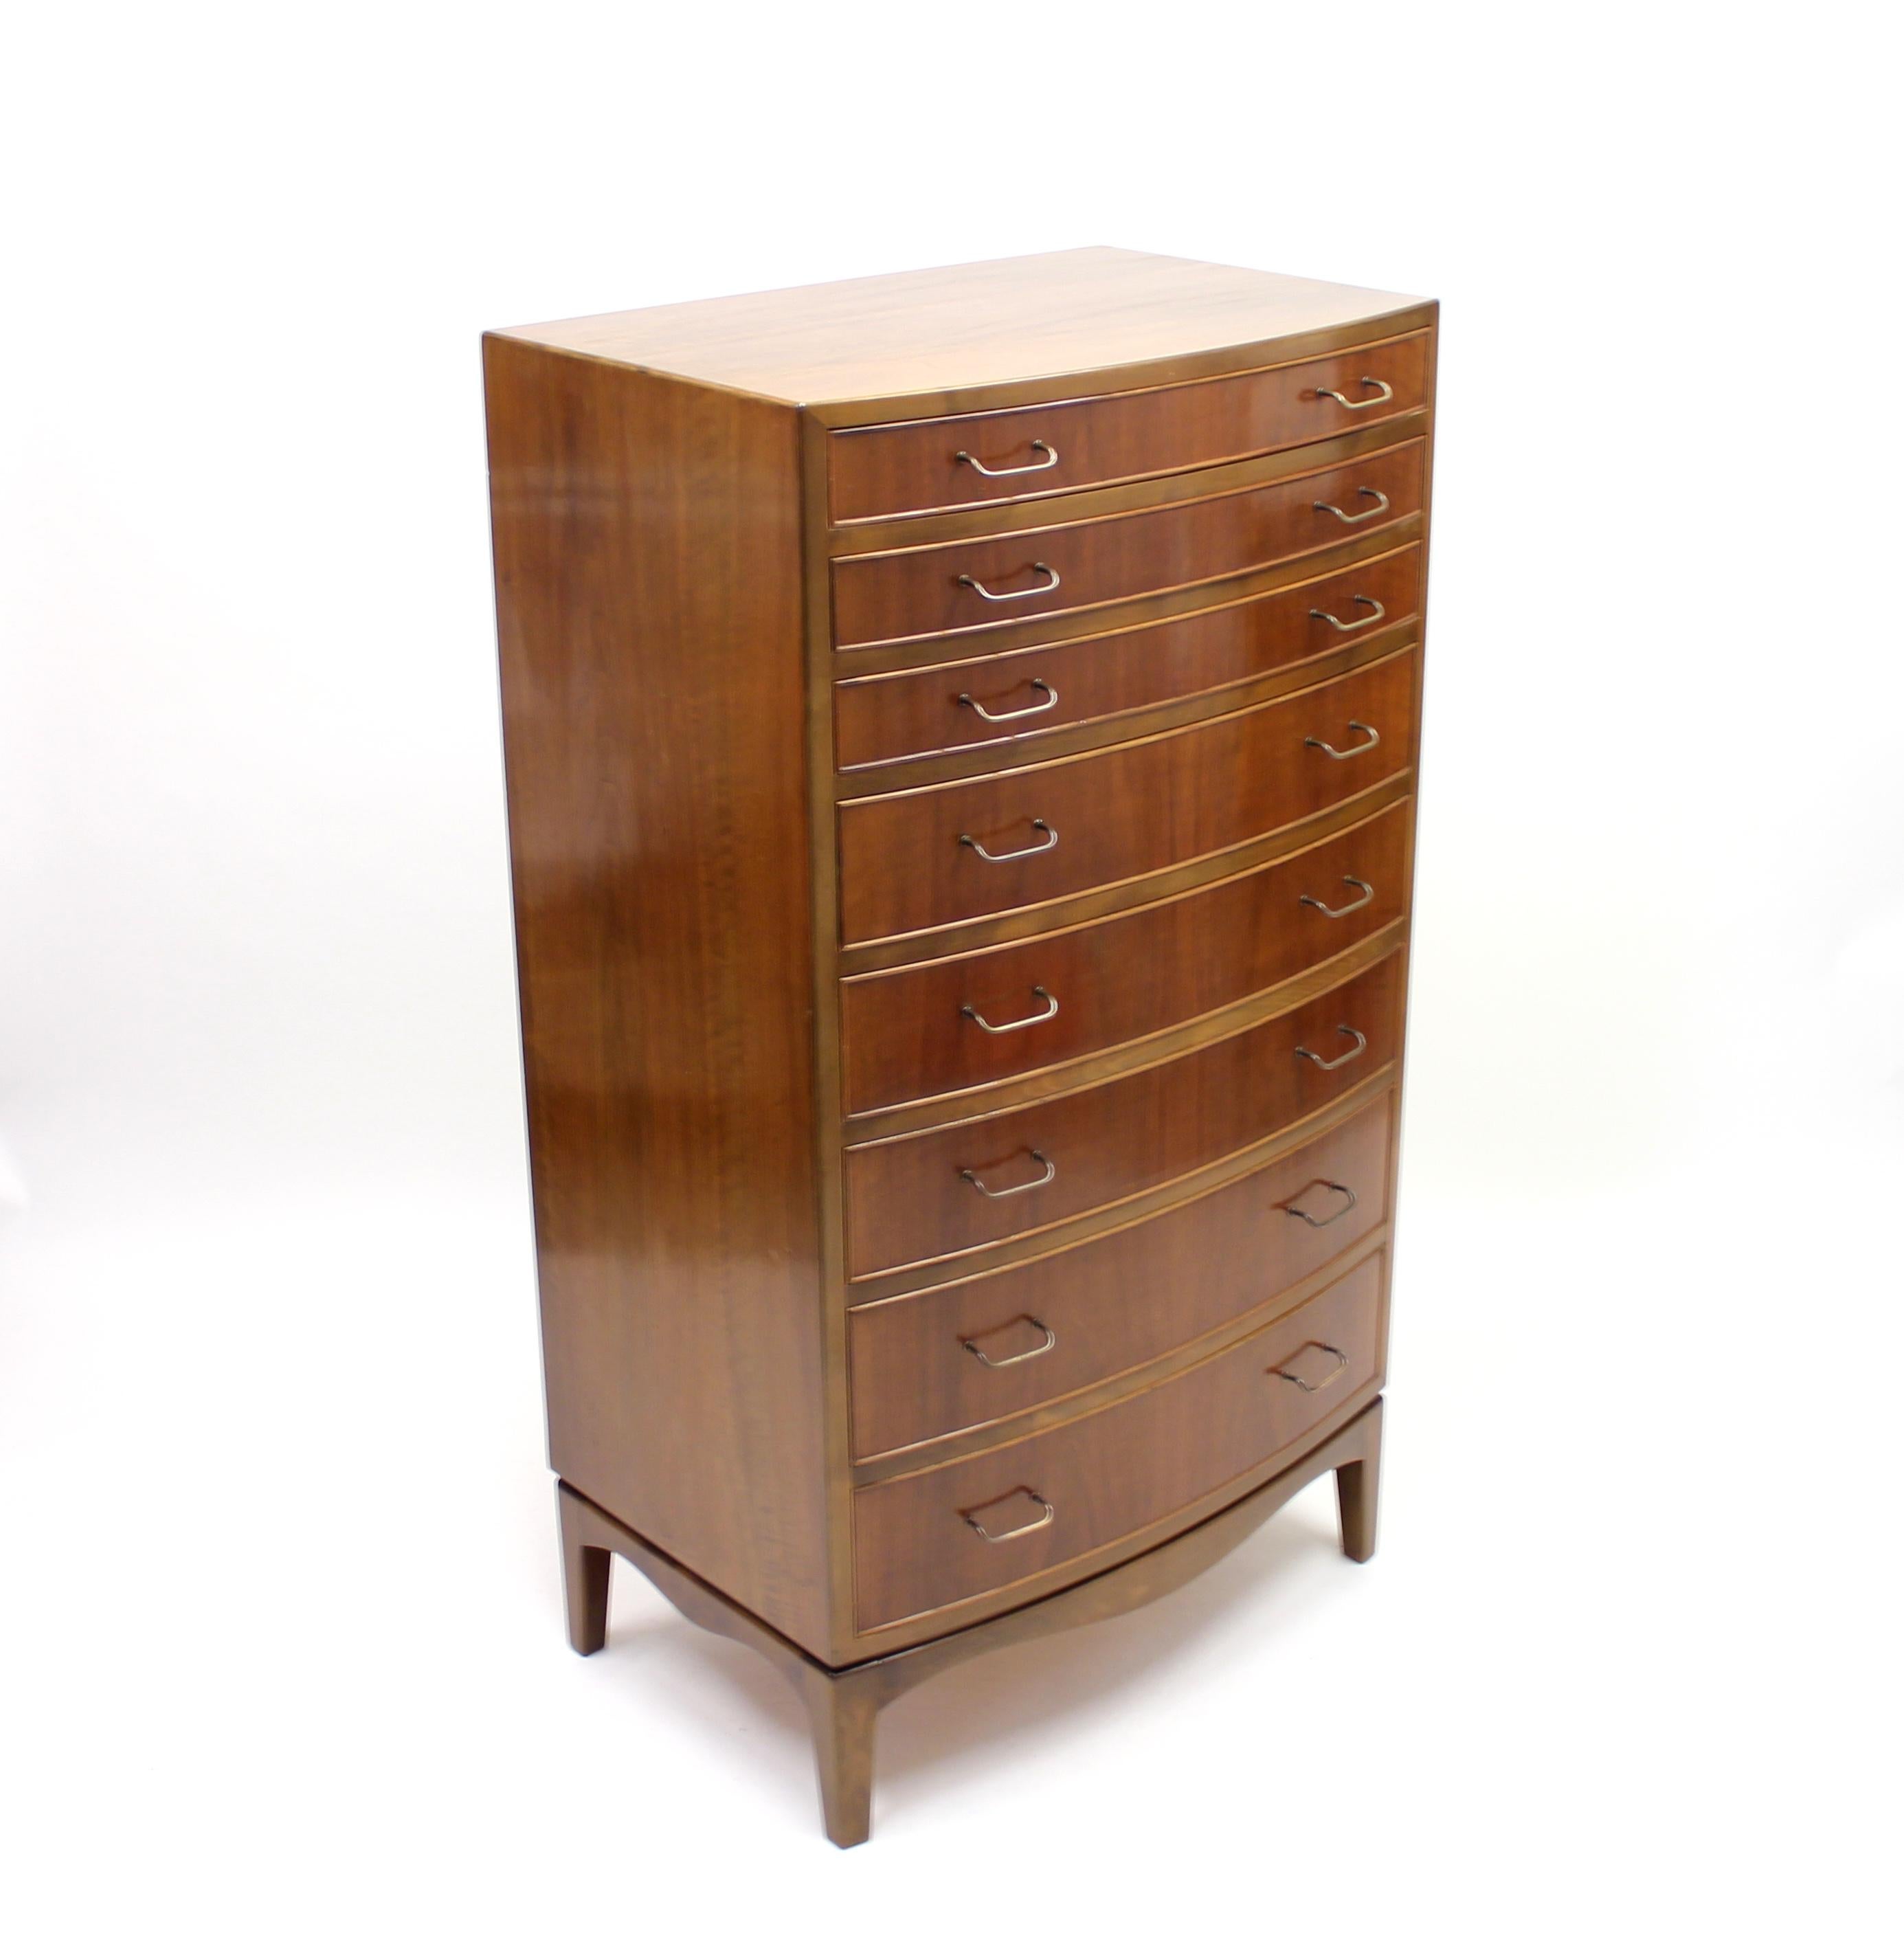 Metal Chest of Drawers by Ole Wanscher for A.J. Iversen, 1940s For Sale